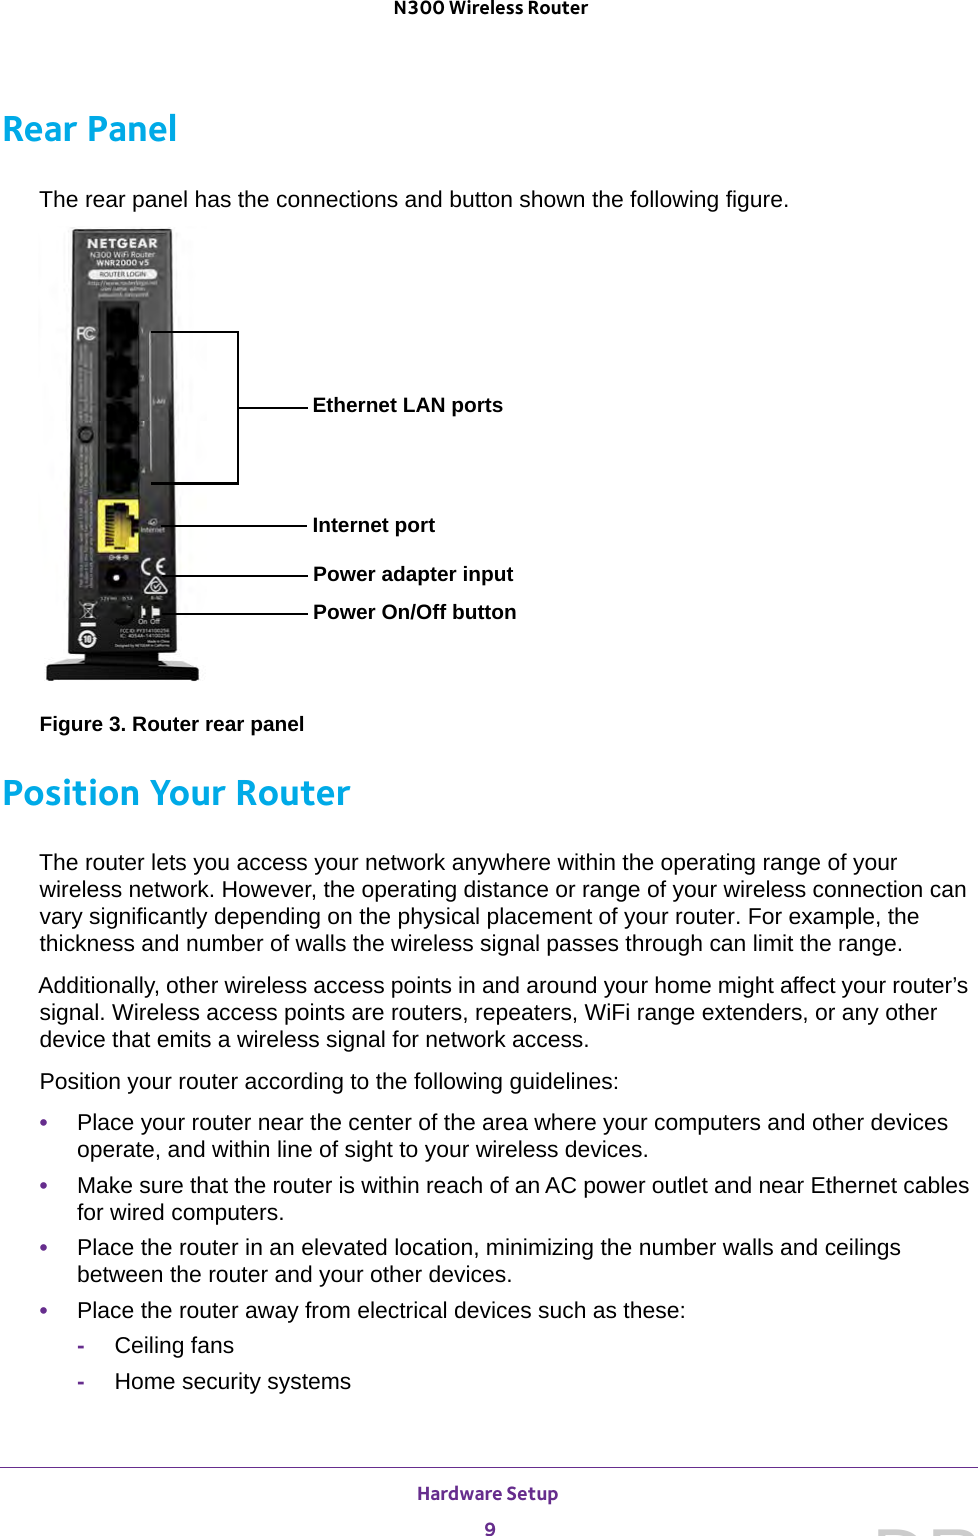 Hardware Setup 9 N300 Wireless RouterRear PanelThe rear panel has the connections and button shown the following figure.Power adapter inputEthernet LAN portsPower On/Off buttonInternet portFigure 3. Router rear panelPosition Your RouterThe router lets you access your network anywhere within the operating range of your wireless network. However, the operating distance or range of your wireless connection can vary significantly depending on the physical placement of your router. For example, the thickness and number of walls the wireless signal passes through can limit the range. Additionally, other wireless access points in and around your home might affect your router’s signal. Wireless access points are routers, repeaters, WiFi range extenders, or any other device that emits a wireless signal for network access.Position your router according to the following guidelines:•Place your router near the center of the area where your computers and other devices operate, and within line of sight to your wireless devices.•Make sure that the router is within reach of an AC power outlet and near Ethernet cables for wired computers.•Place the router in an elevated location, minimizing the number walls and ceilings between the router and your other devices.•Place the router away from electrical devices such as these:-Ceiling fans-Home security systemsDRAFT